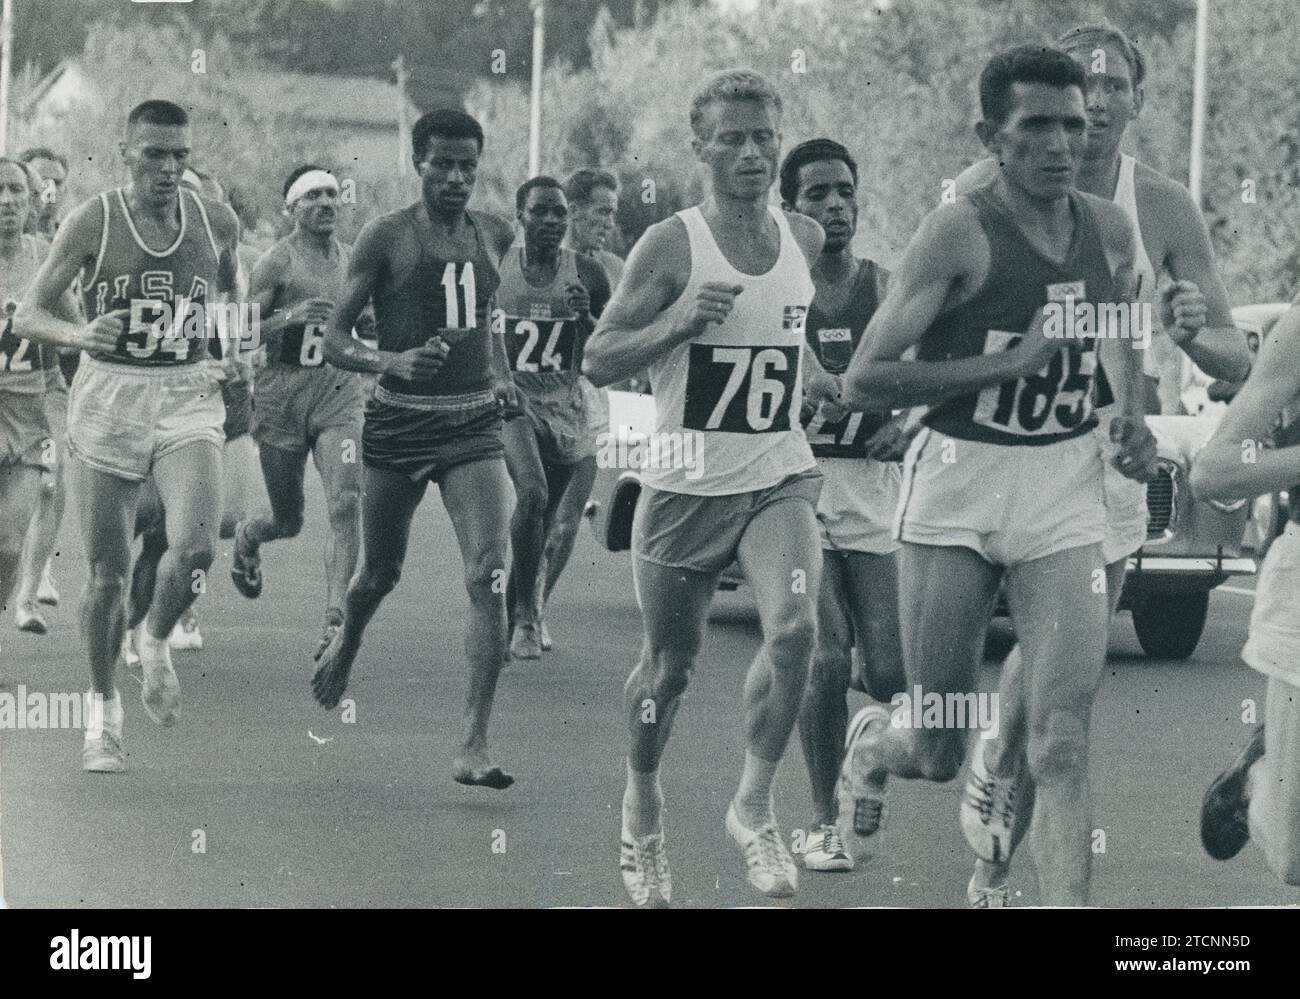 Rome, 09/10/1960. Rome Olympics. Abebe Bikila, a member of the Imperial Guard of the Emperor of Ethiopia, wins the Olympic marathon running barefoot. In the image, at a moment in the race. Credit: Album / Archivo ABC Stock Photo